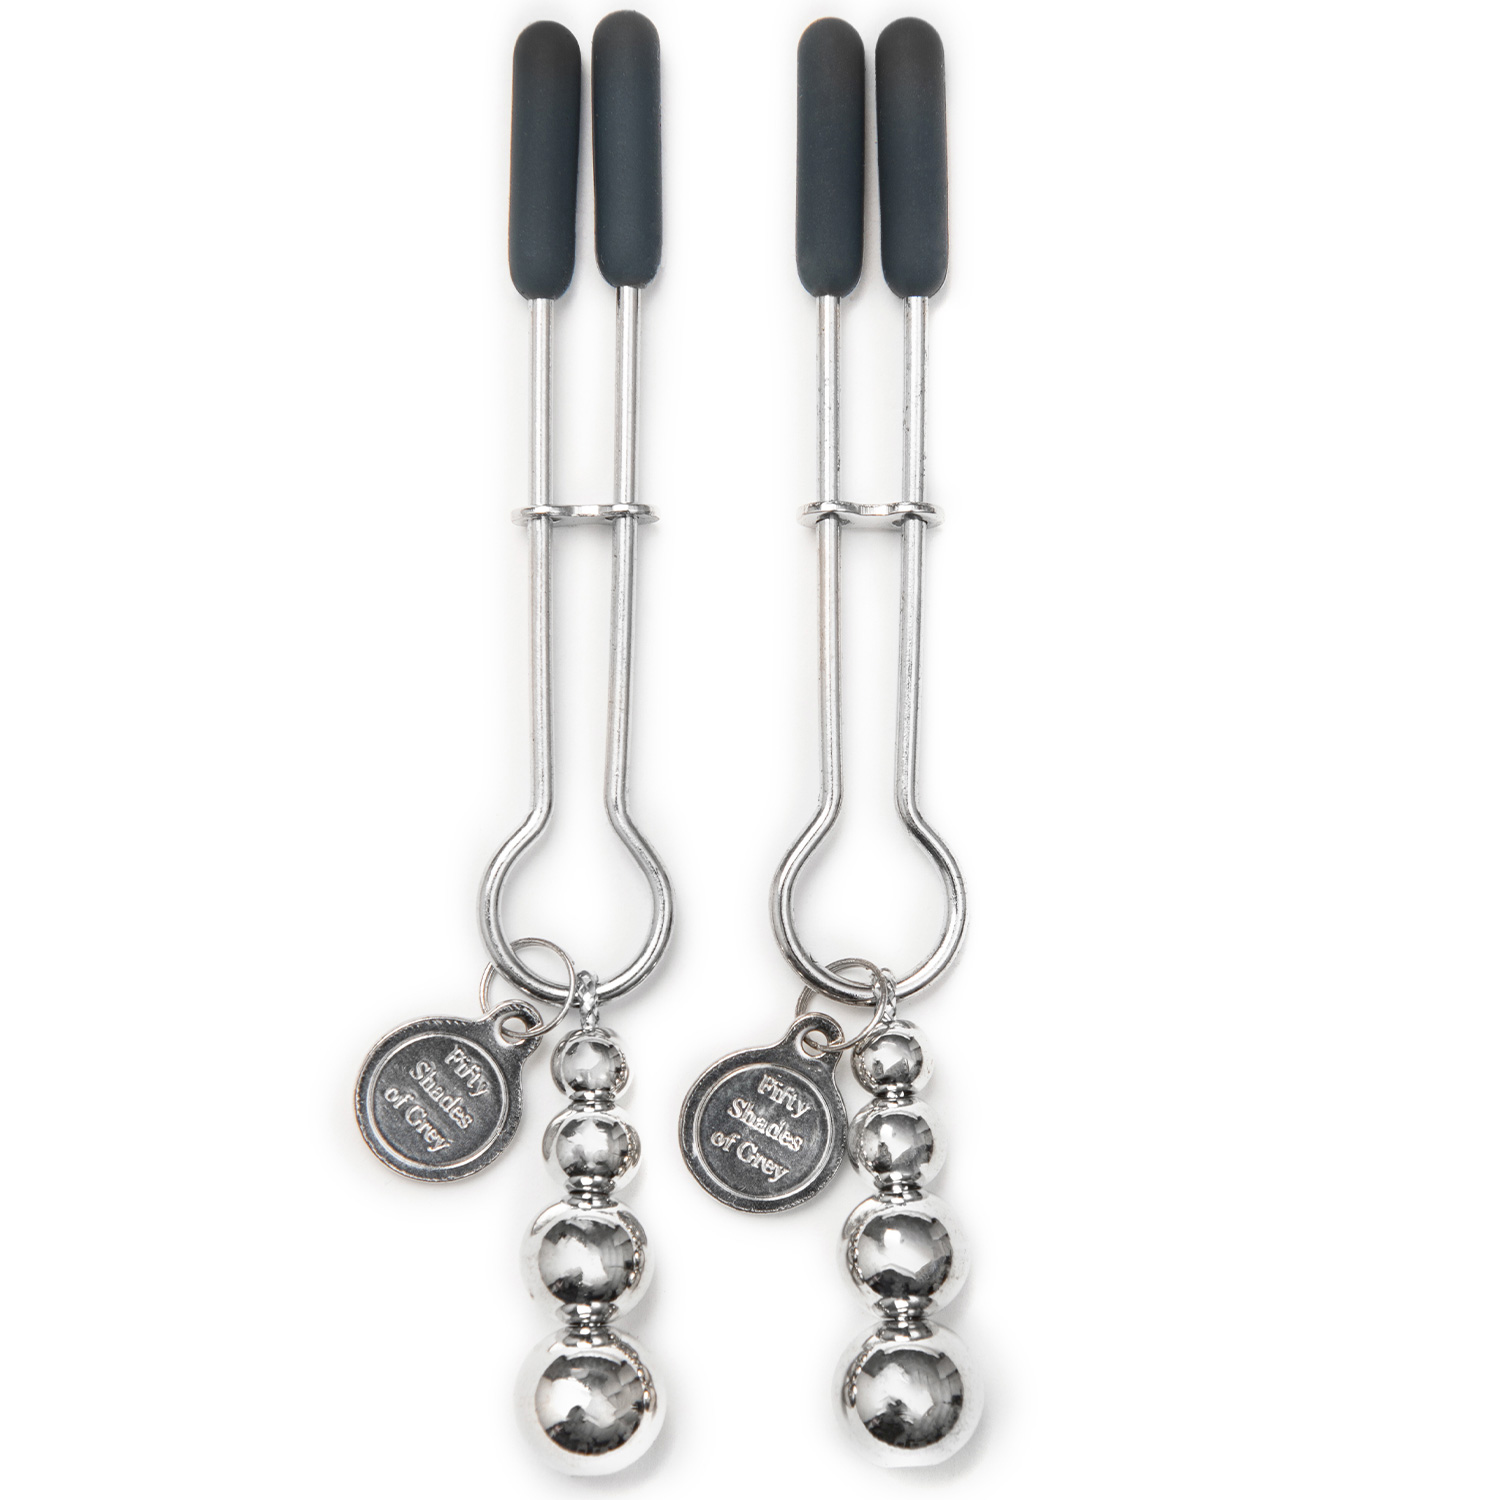 Fifty Shades of Grey The Pinch Nipple Clamps - Fifty Shades